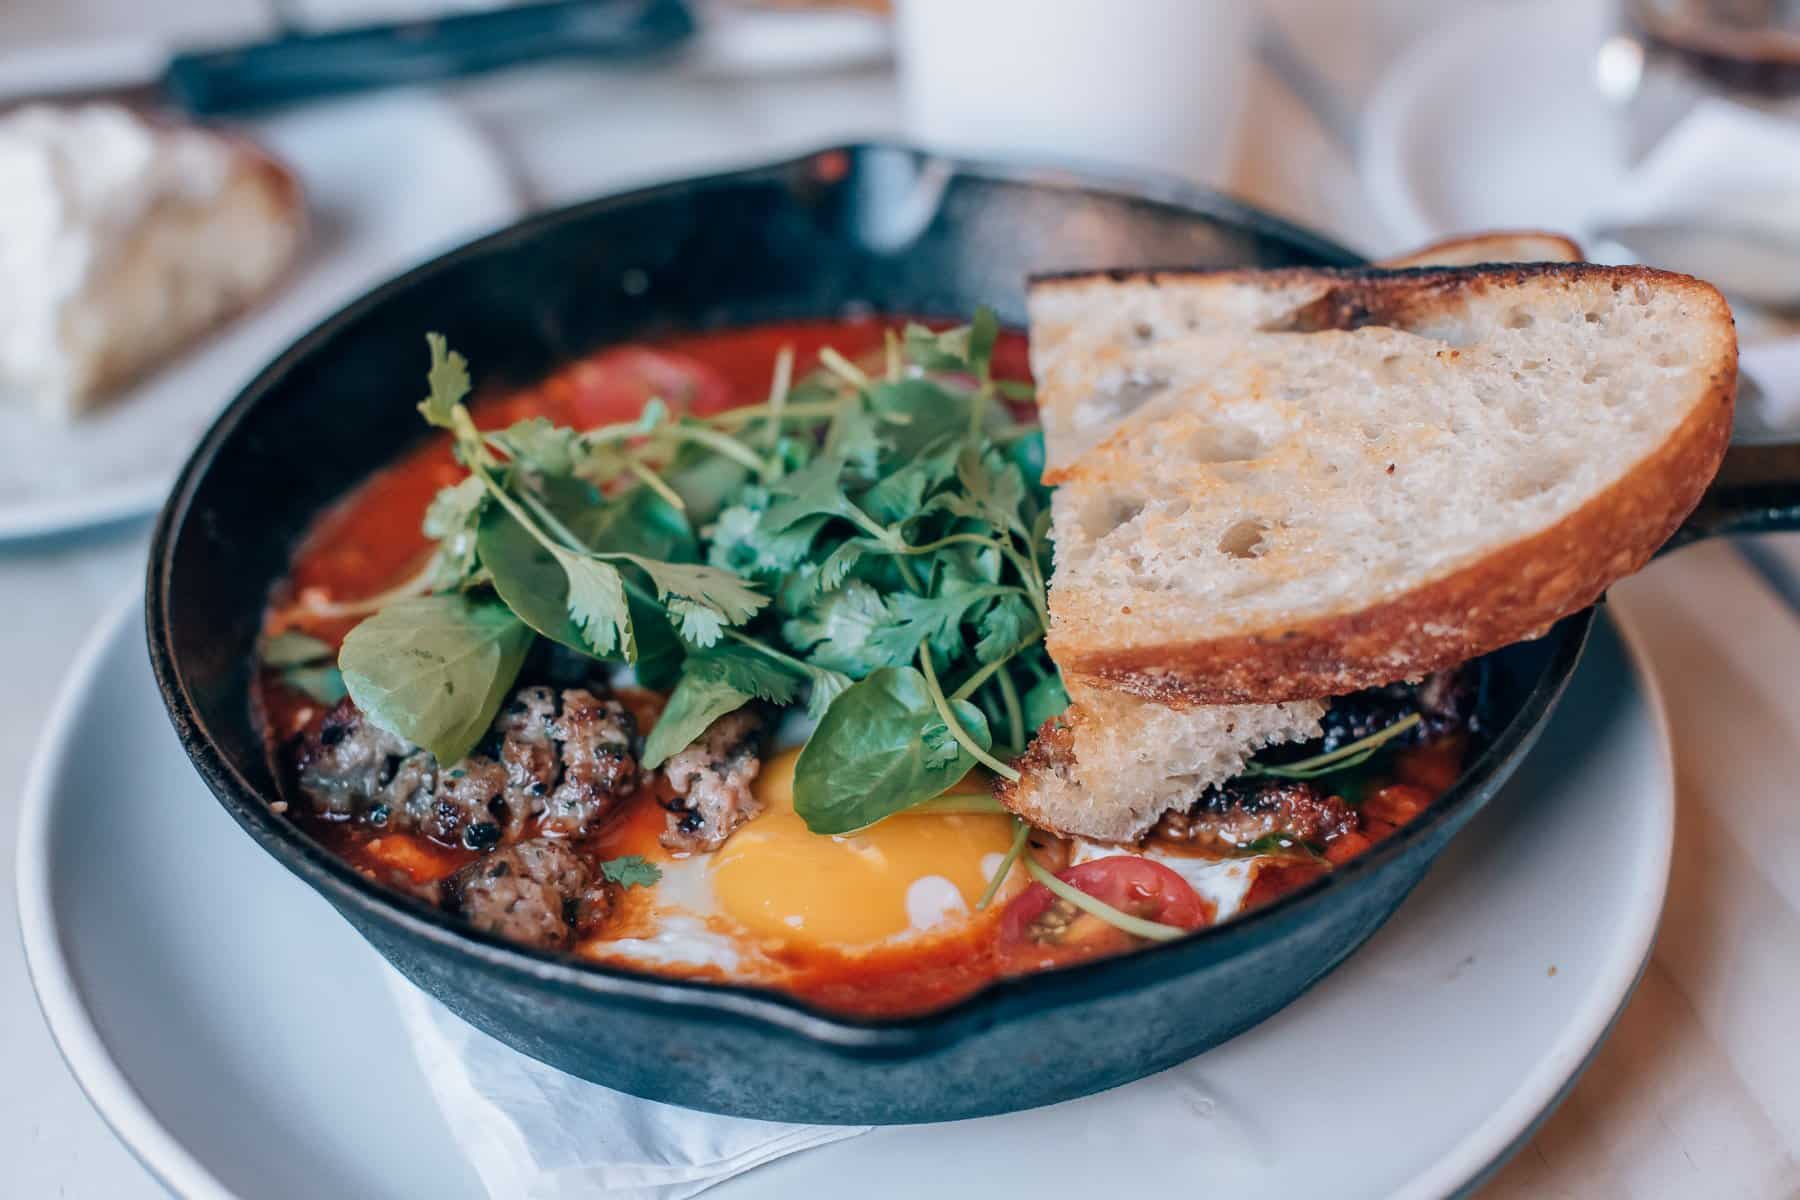 The best Scottsdale brunch spots, by travel blogger What The Fab